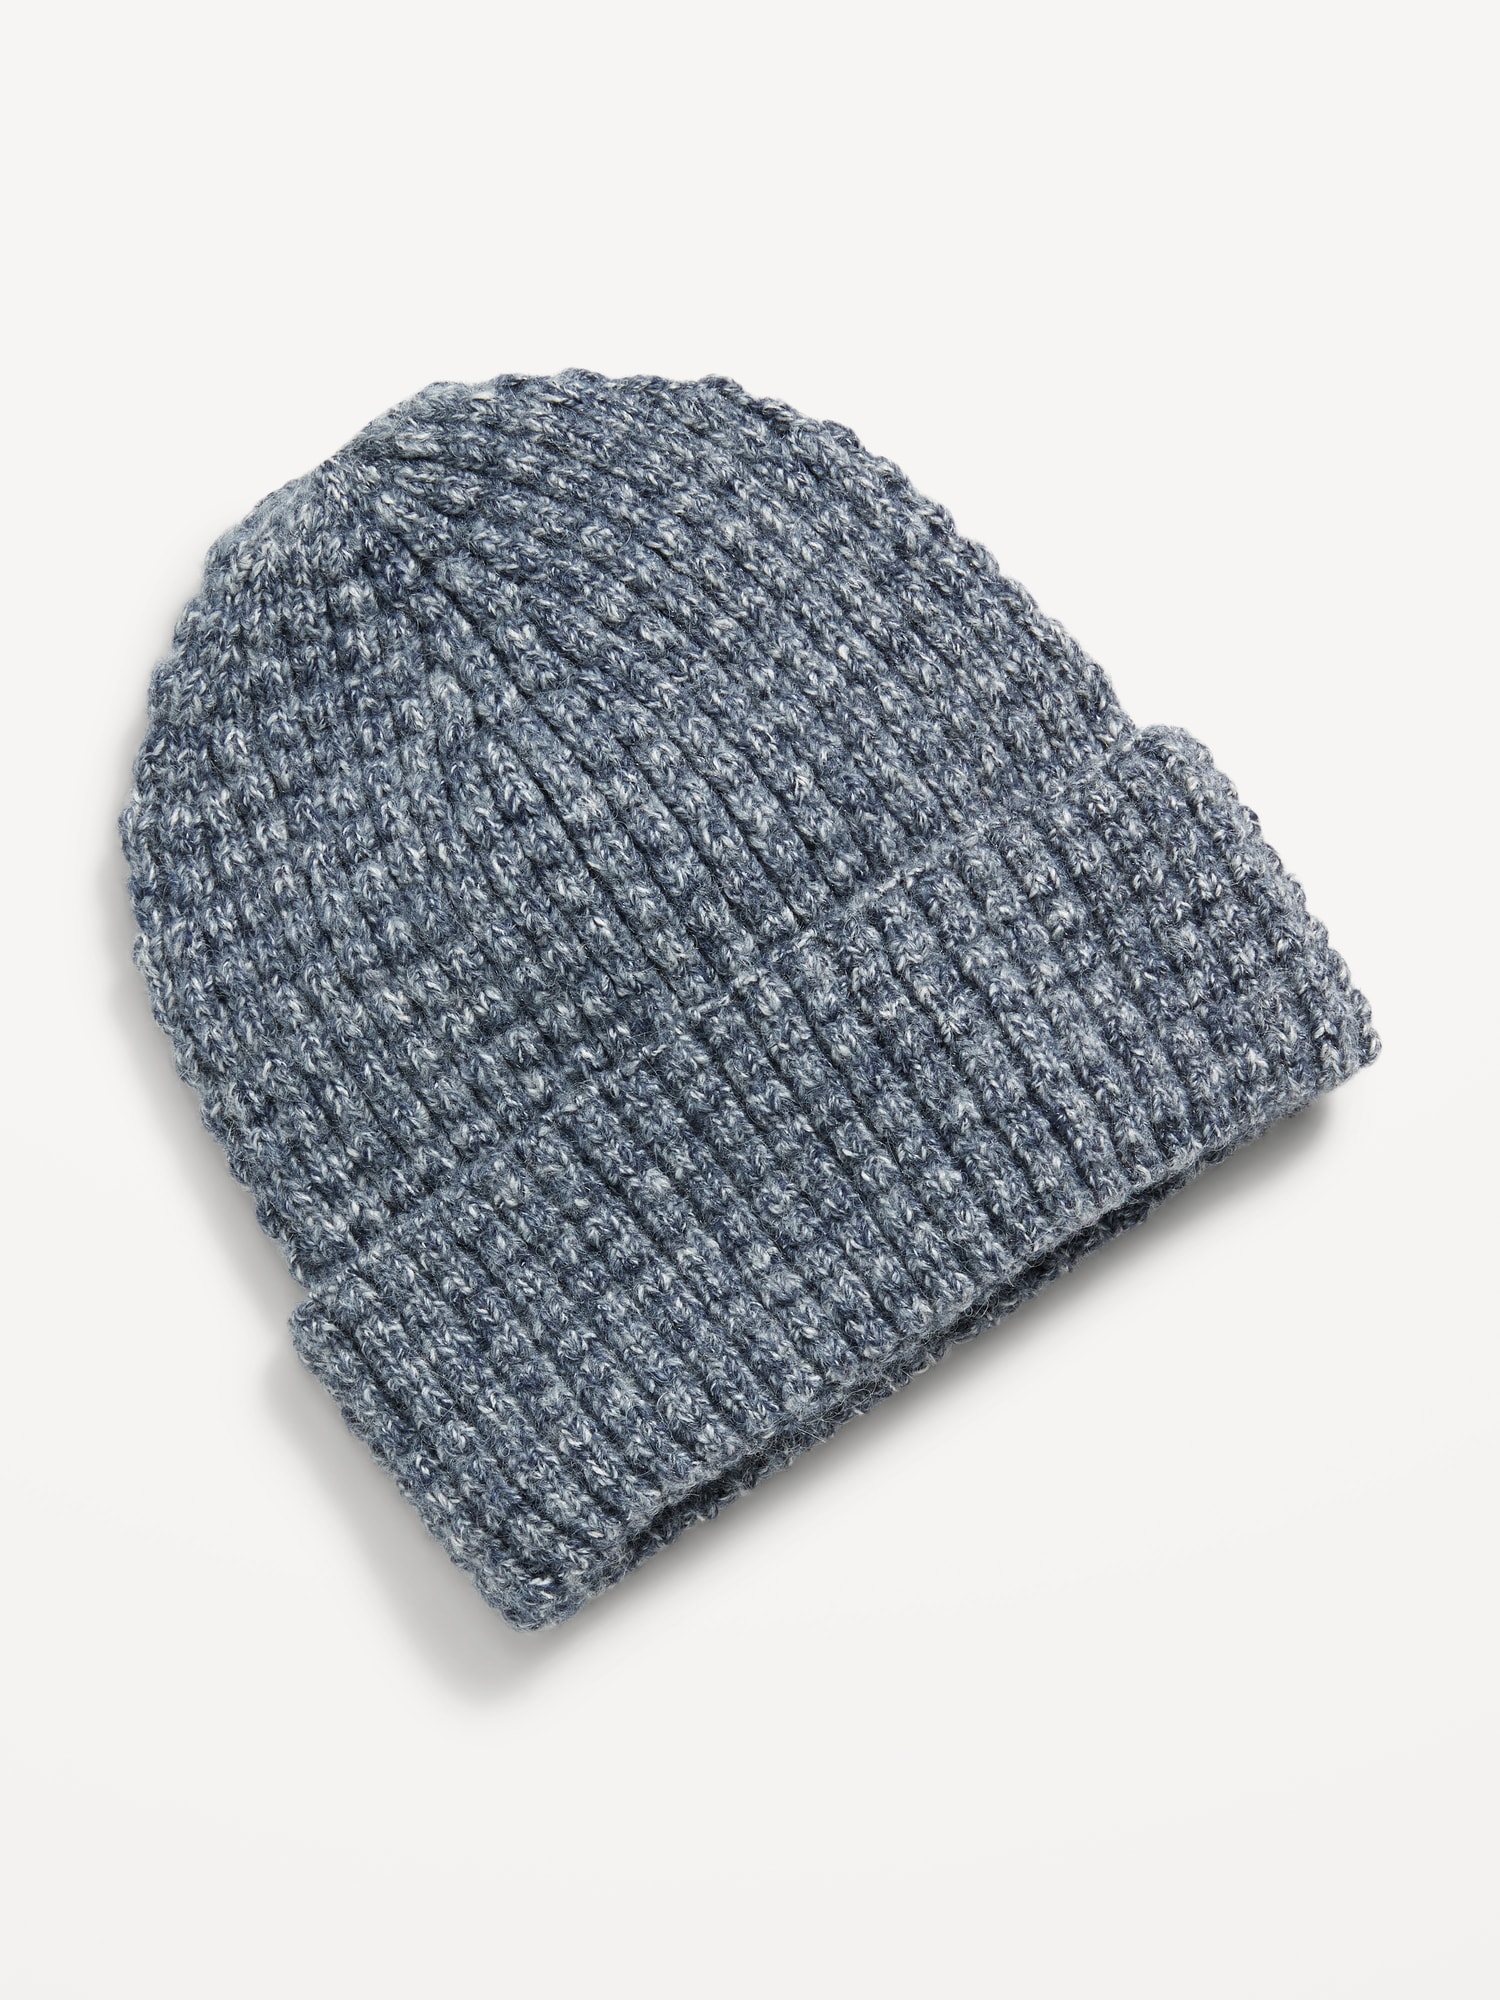 Old Adults Beanie | Navy Waffle-Knit for Gender-Neutral